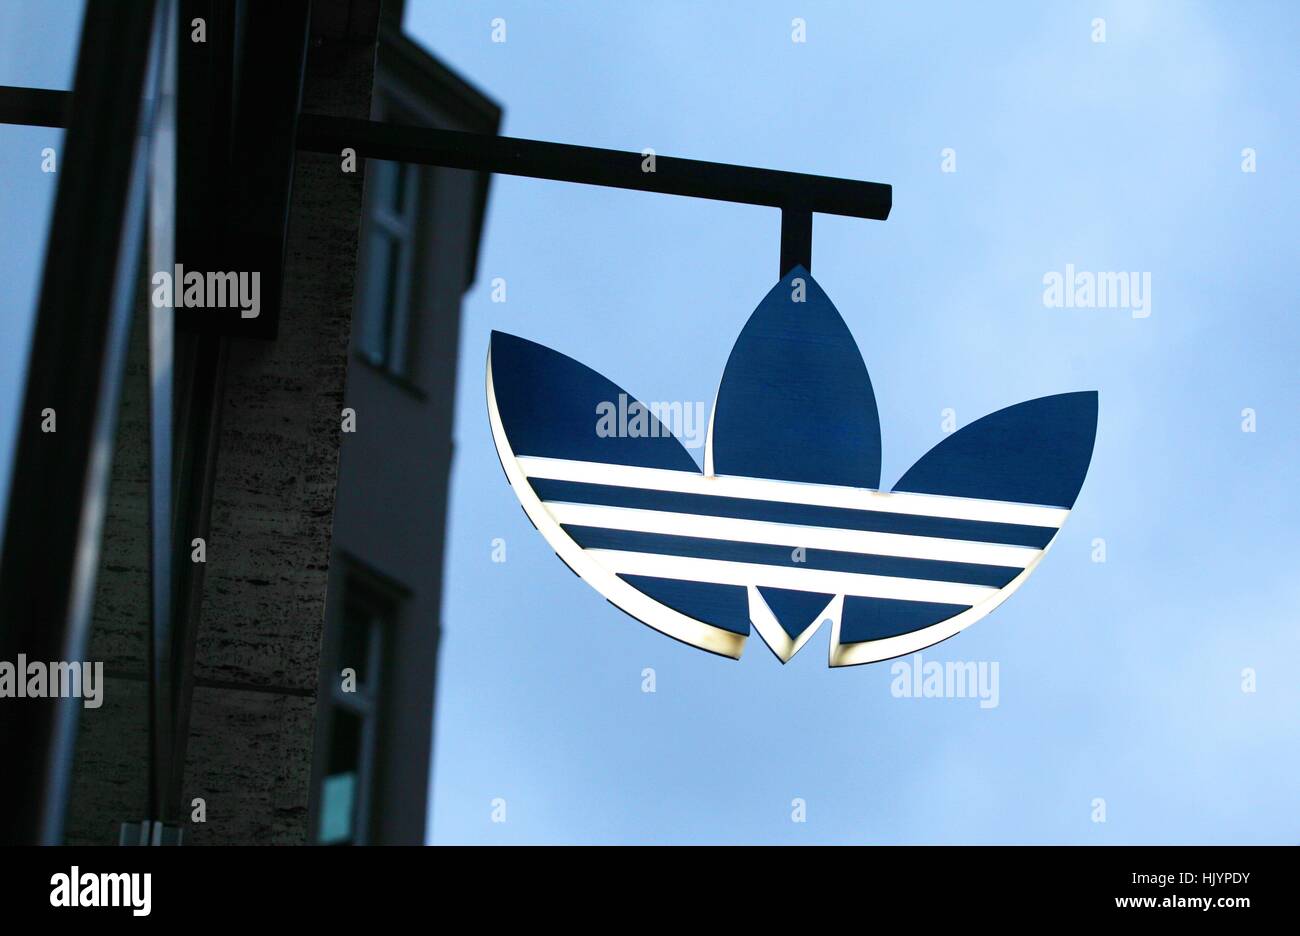 The Adidas logo is seen in Berlin at an Adidas flagstore on December 11,  2016. Photo: Wolfram Steinberg/dpa | usage worldwide Stock Photo - Alamy